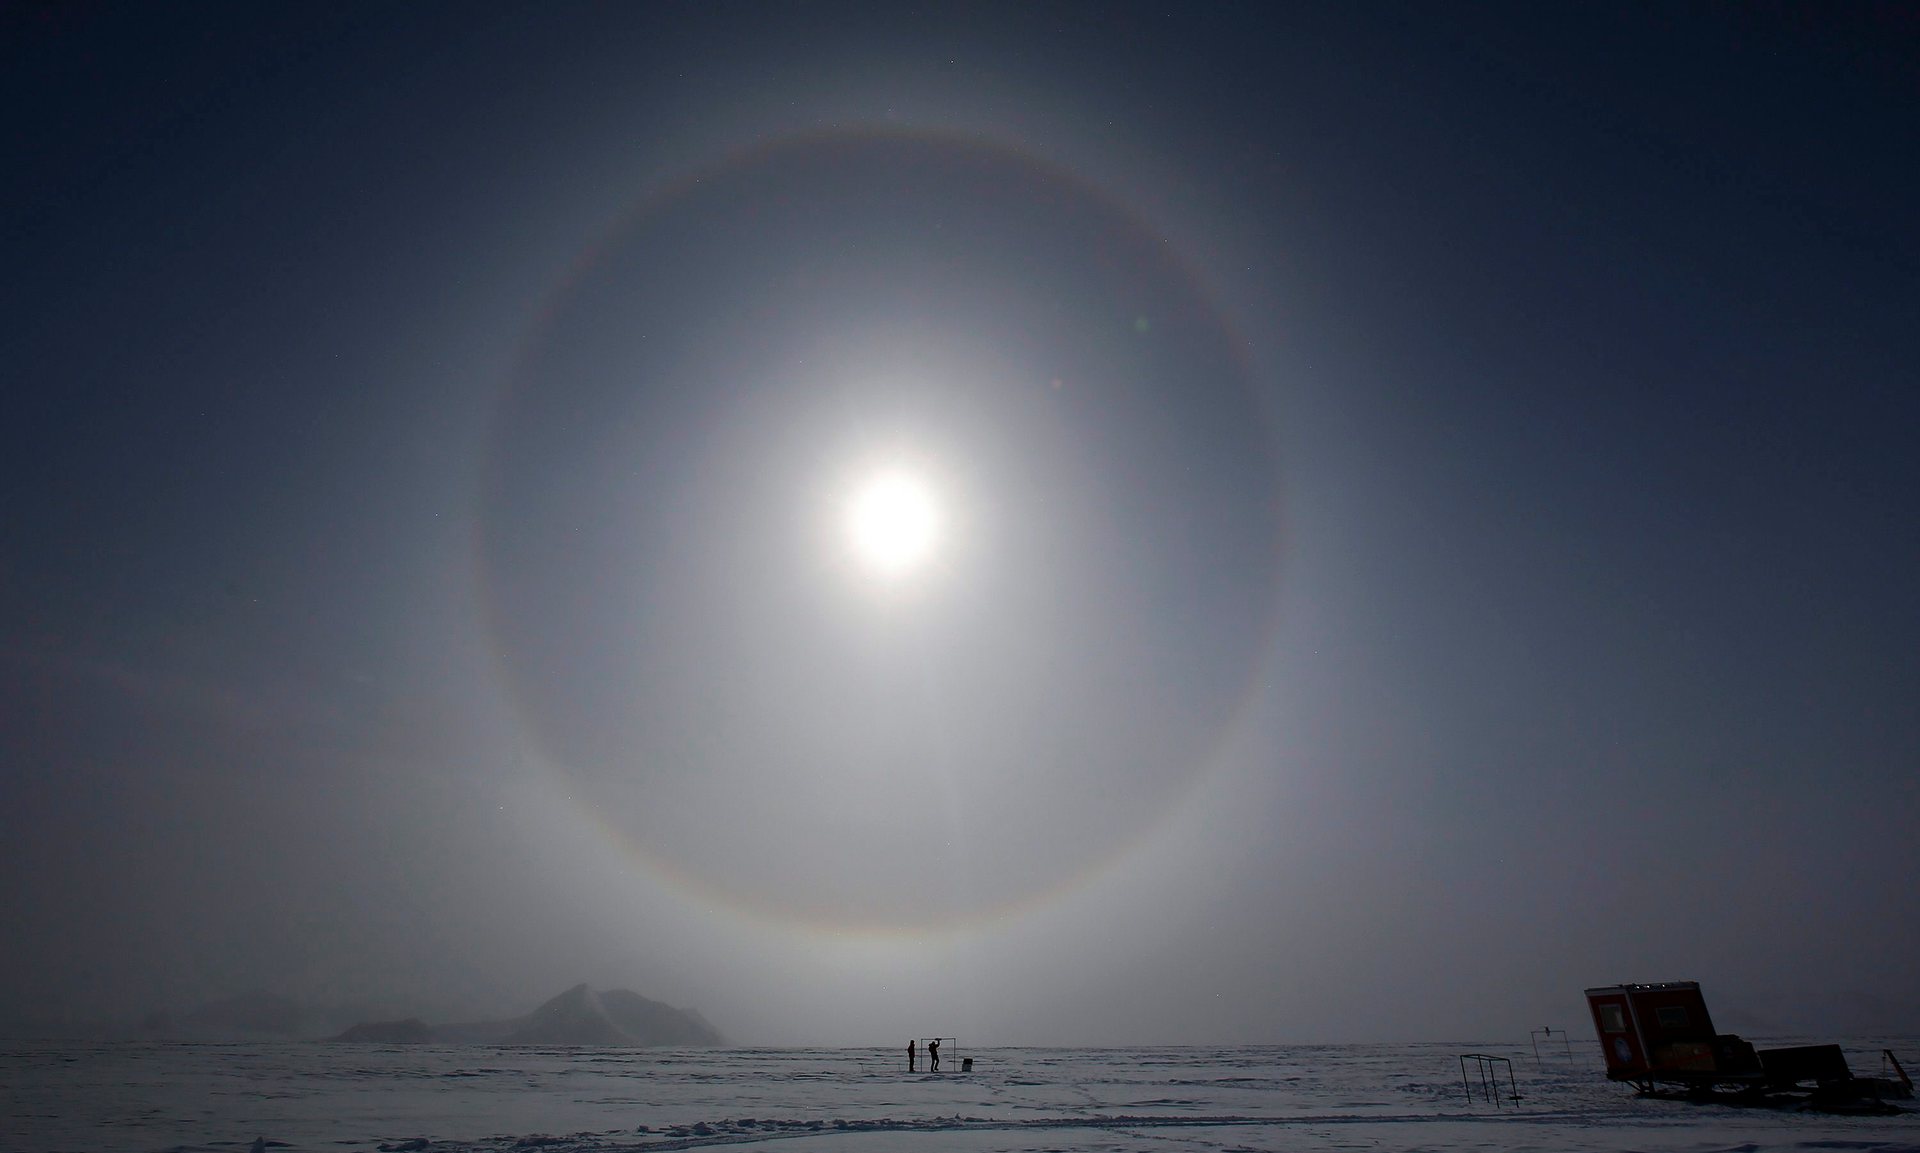 Hole in Ozone Layer is Healing: Researchers